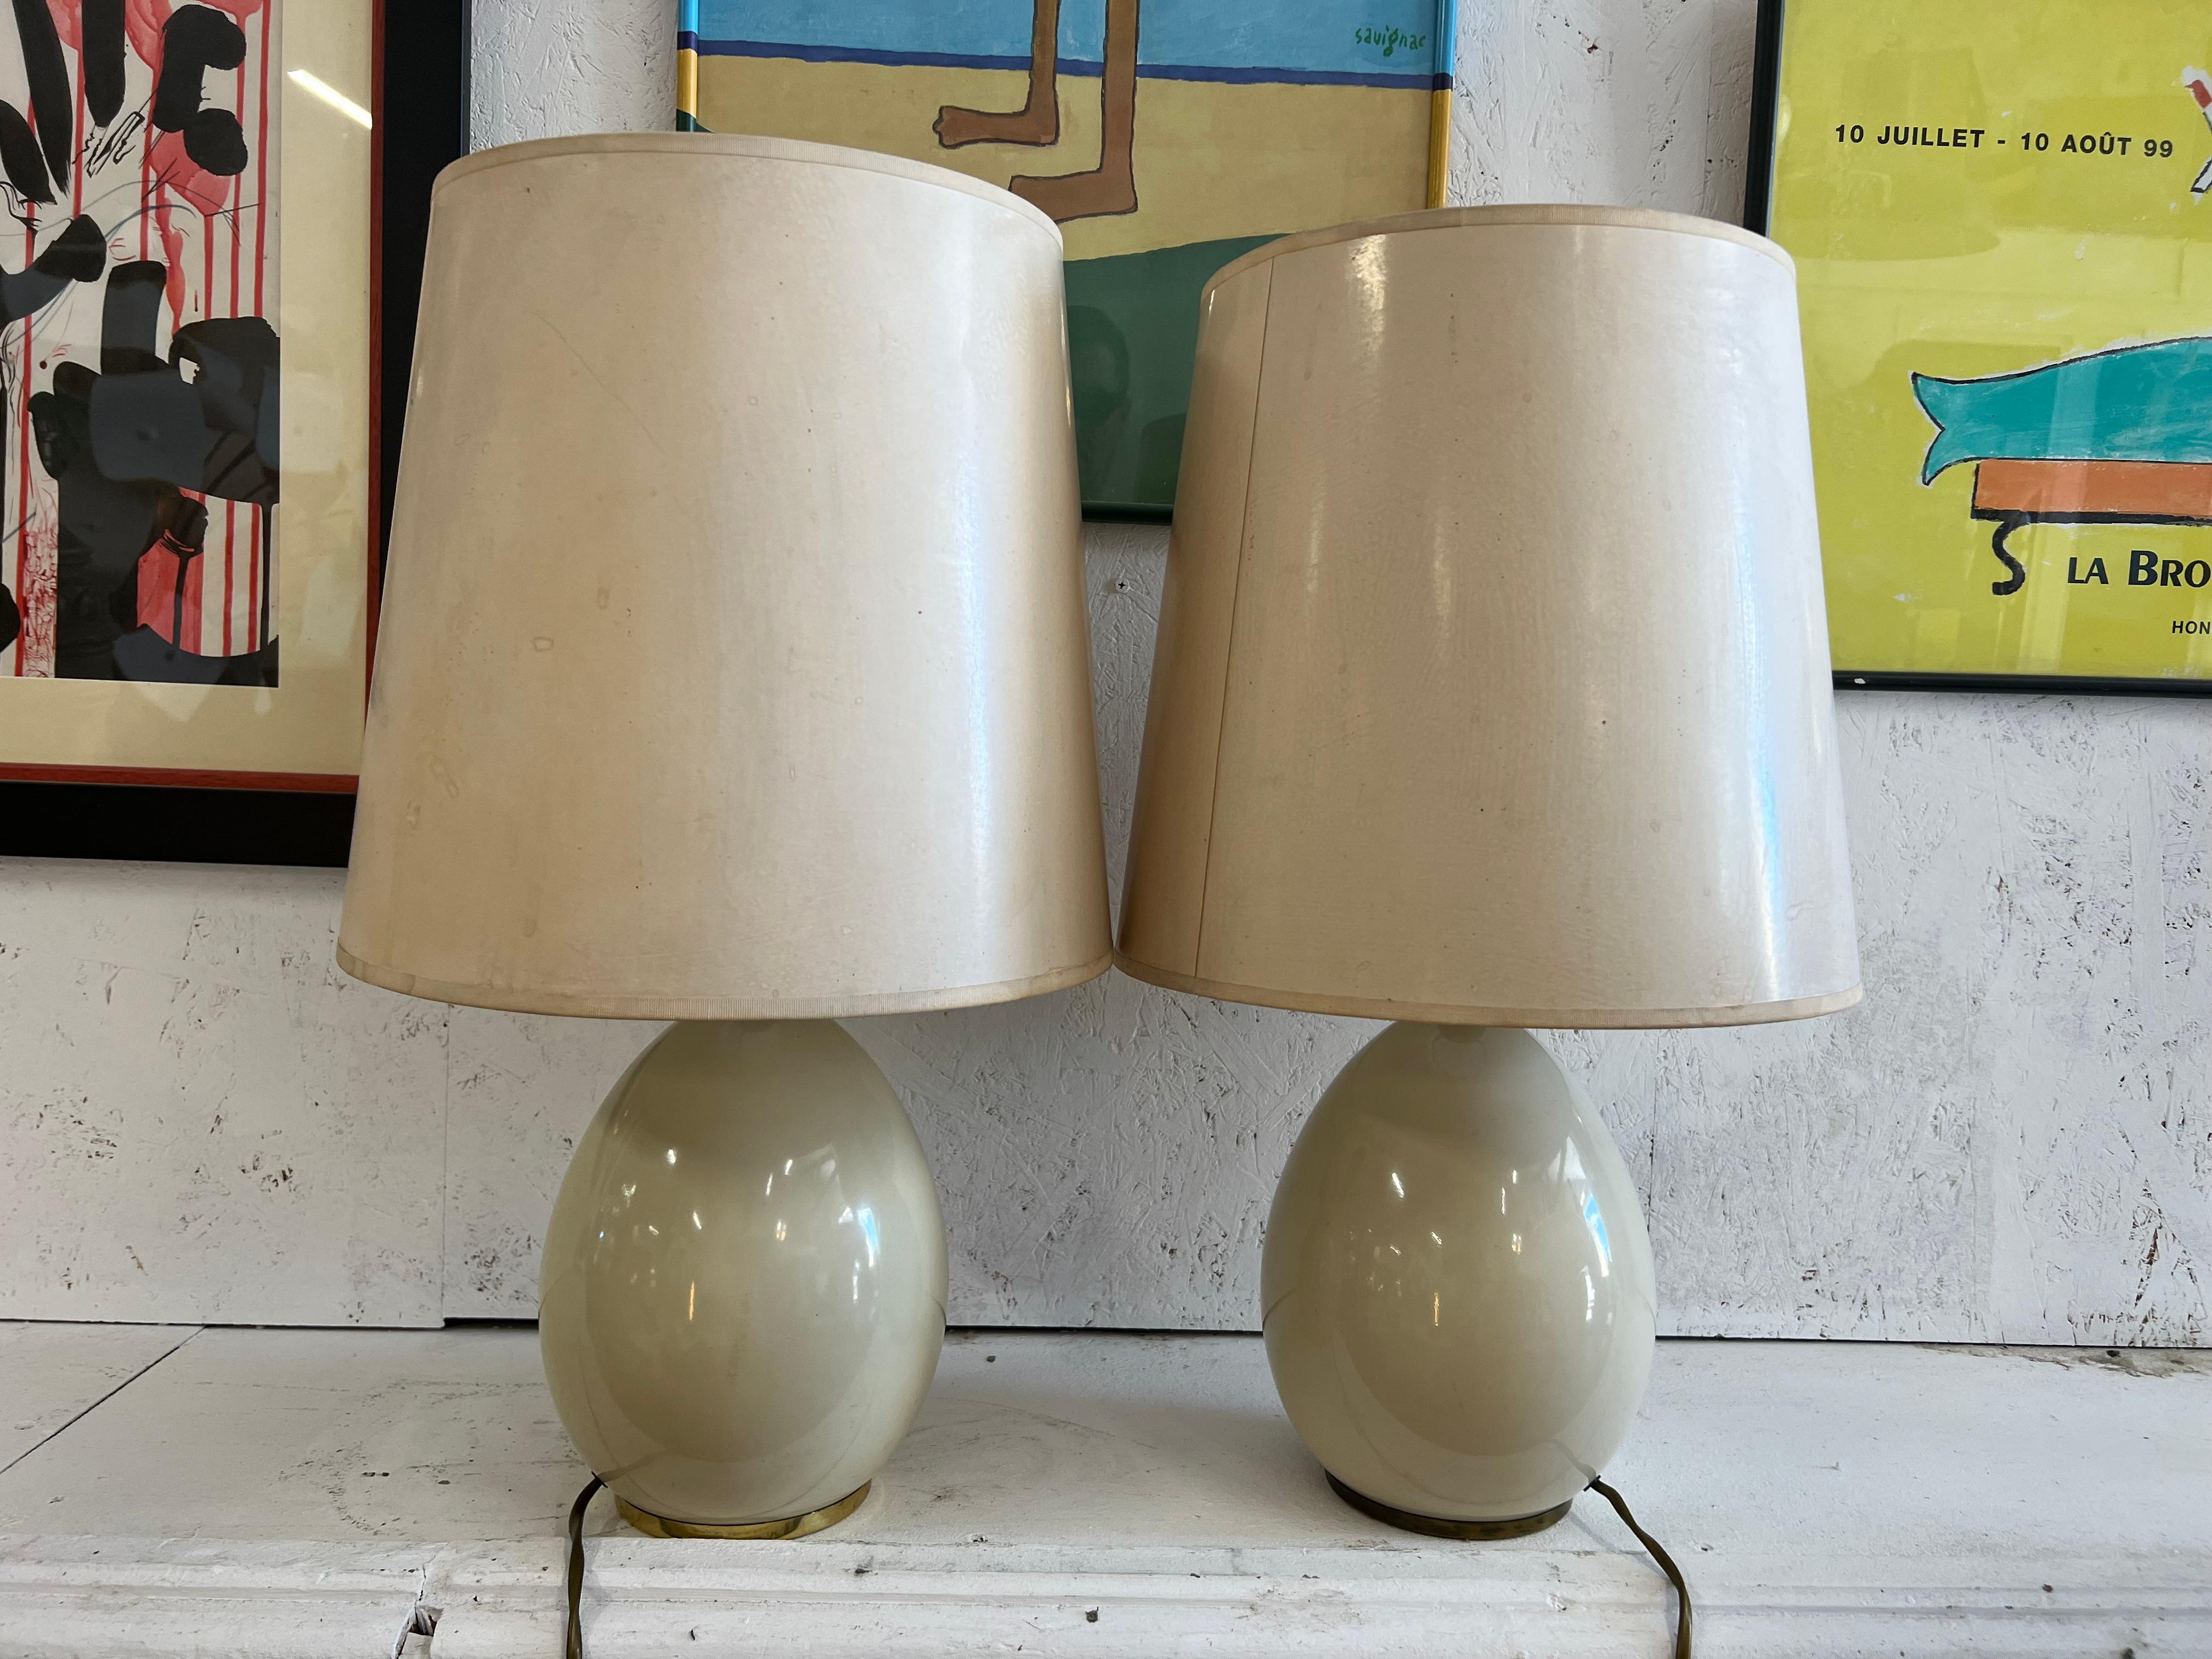 very pretty pair of ivory ceramic lamps in the shape of an egg with their original lampshade
they are typical of the 50s from the Studio Paf Italy brand, egg-shaped makes the object very tactile and decorative

